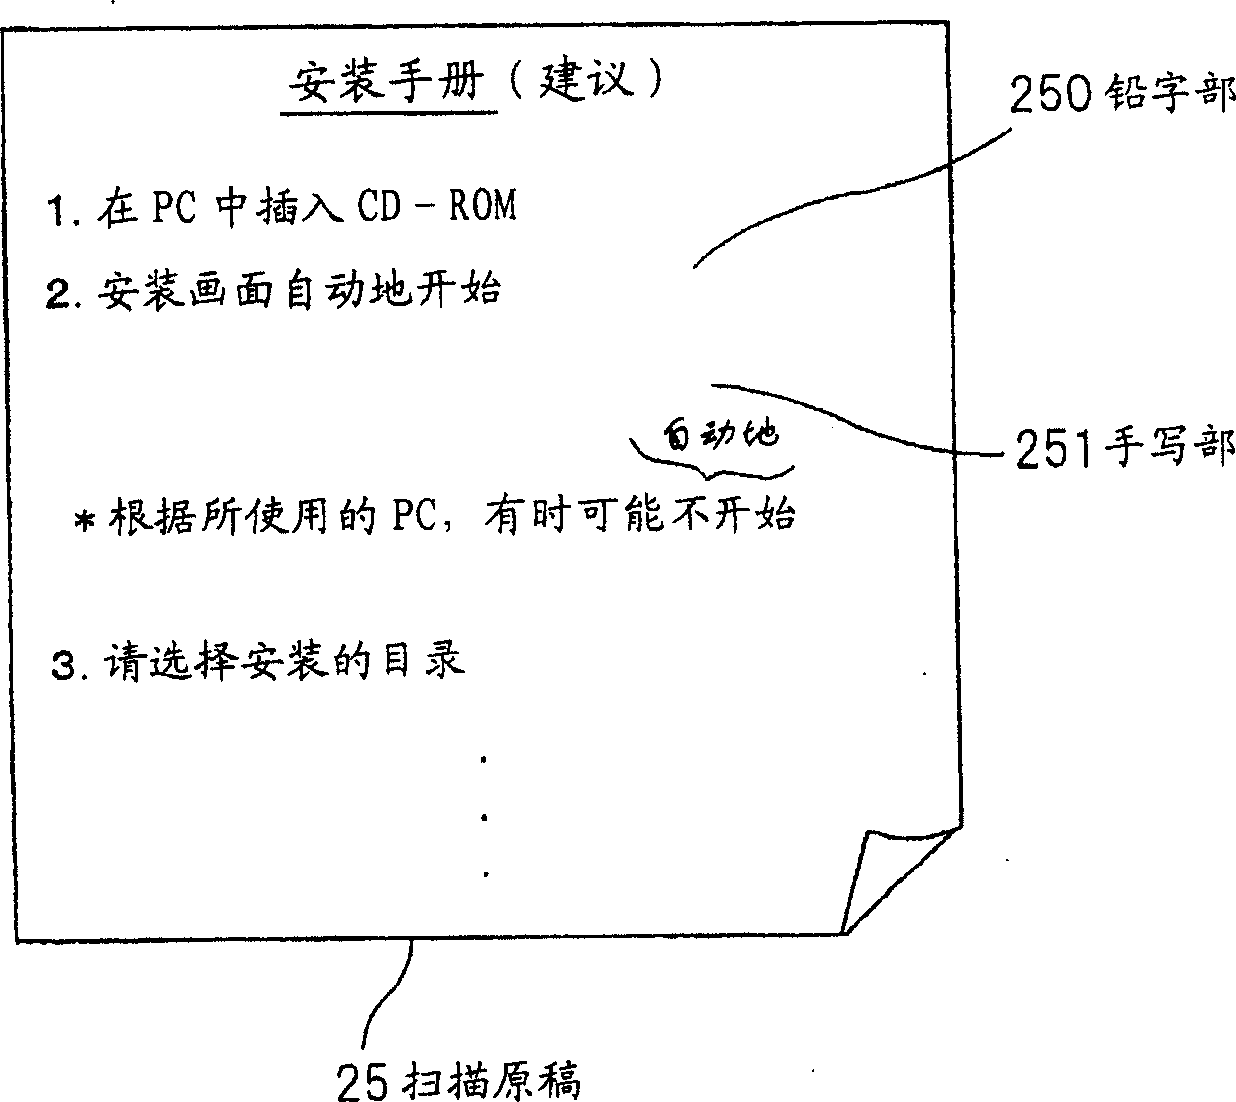 Character recognition apparatus, character recognition method, and character recognition program